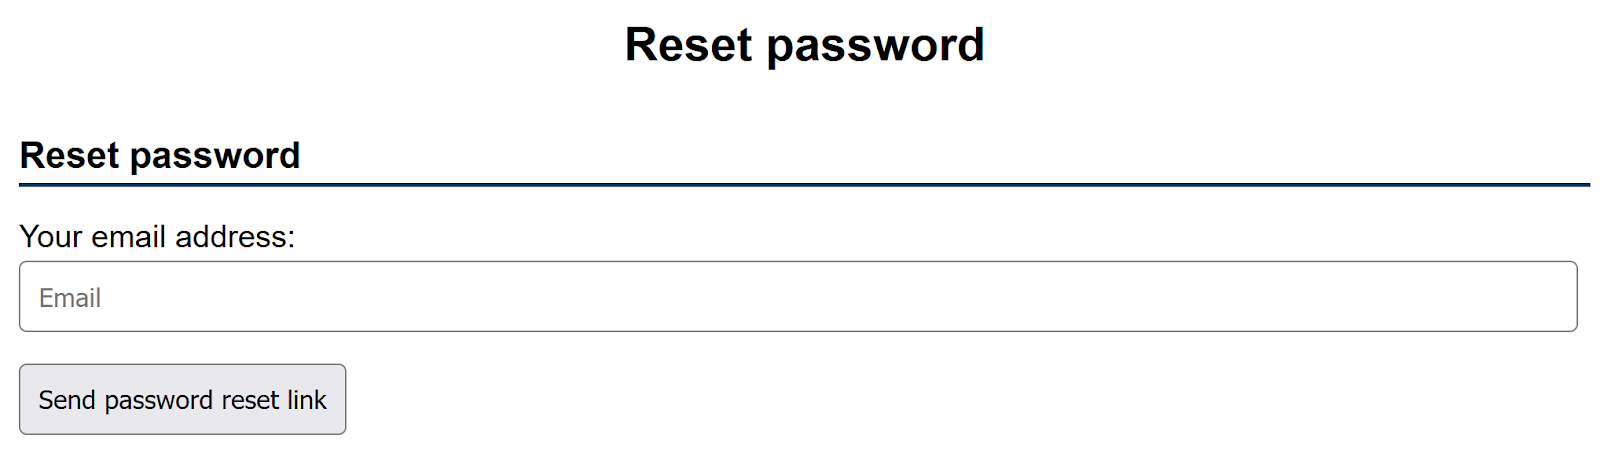 Resetting your password